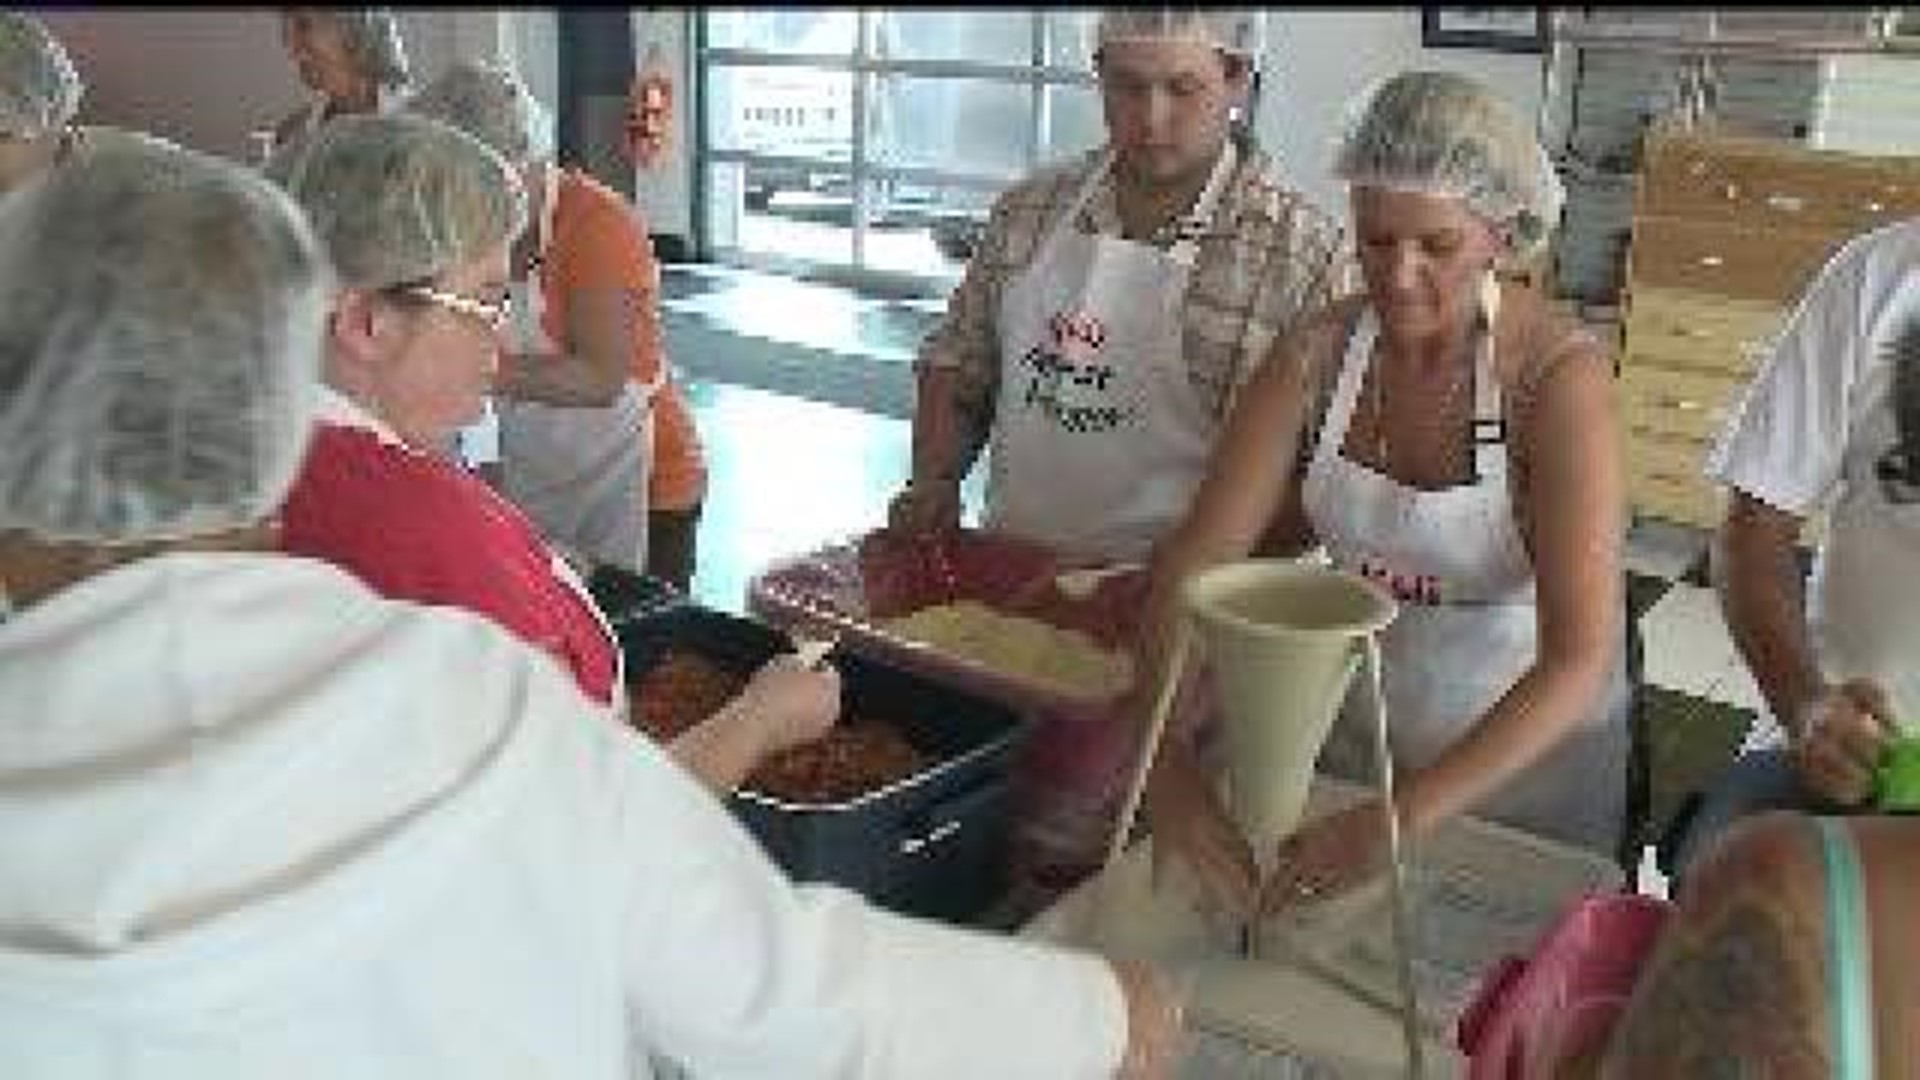 Car dealership helps feed the hungry